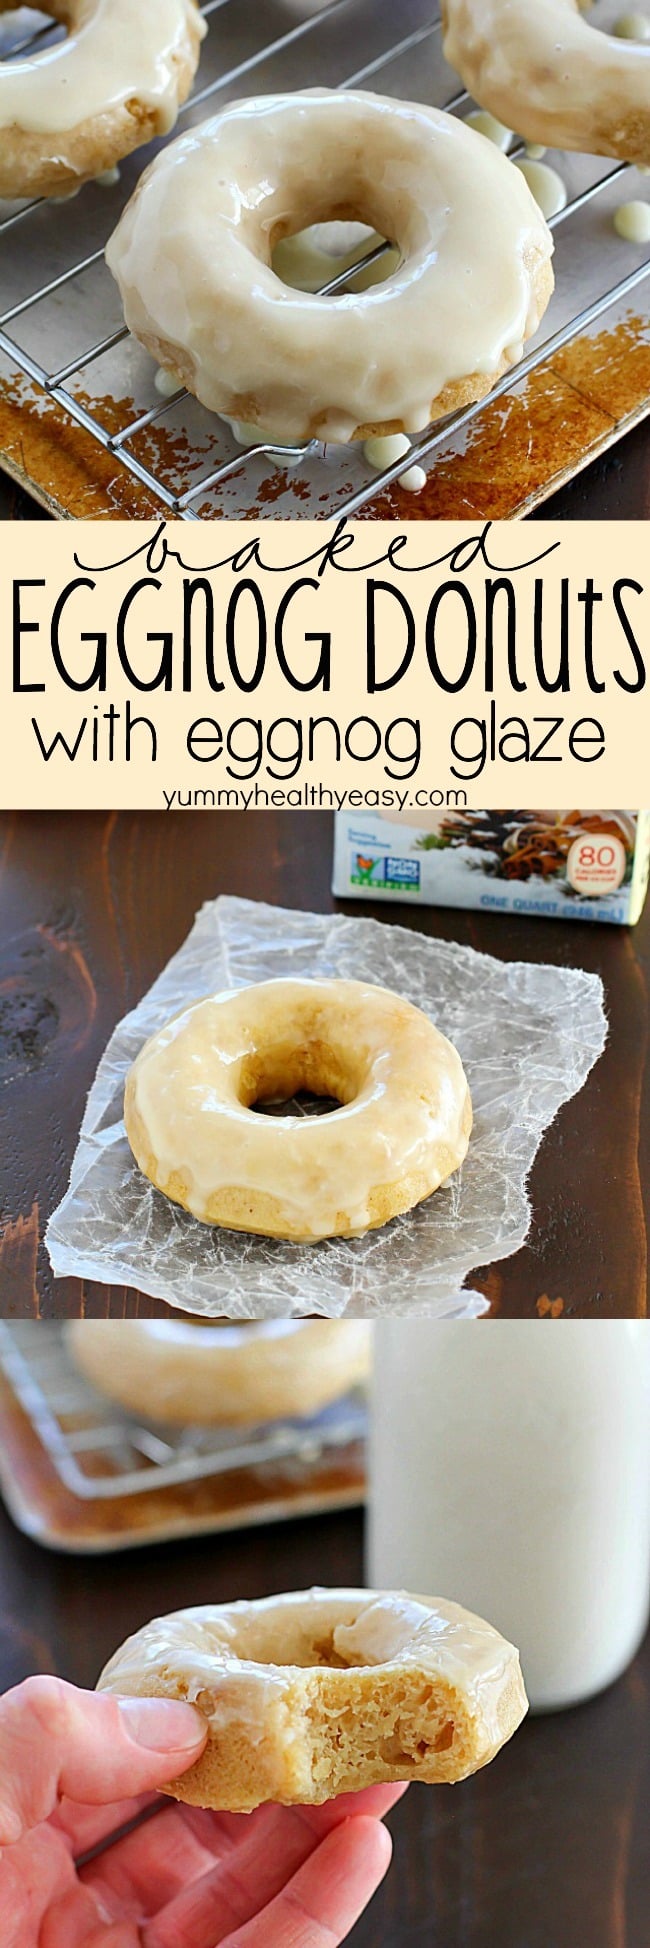 Baked Eggnog Donuts with Eggnog Glaze for the breakfast WIN! These homemade donuts are full of eggnog flavor, moist on the inside, totally easy to make and completely dairy free! If you like eggnog, these are a must-make! Perfect for Christmas breakfast!! AD